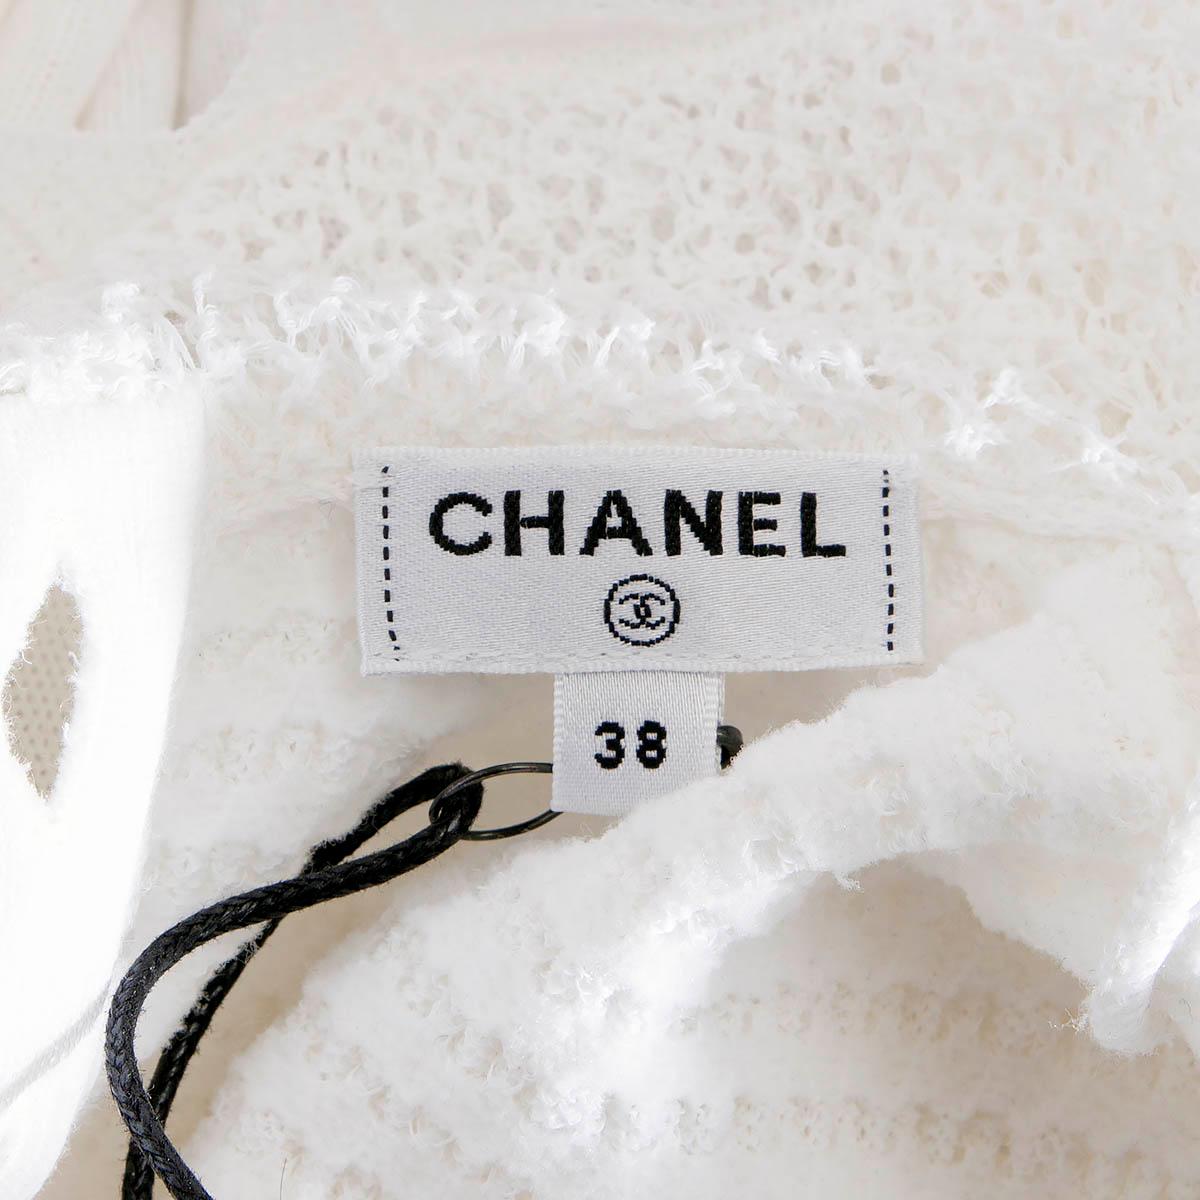 CHANEL white cotton 2020 20S PETER PAN BALLOON SLEEVE Sweater 38 S 4